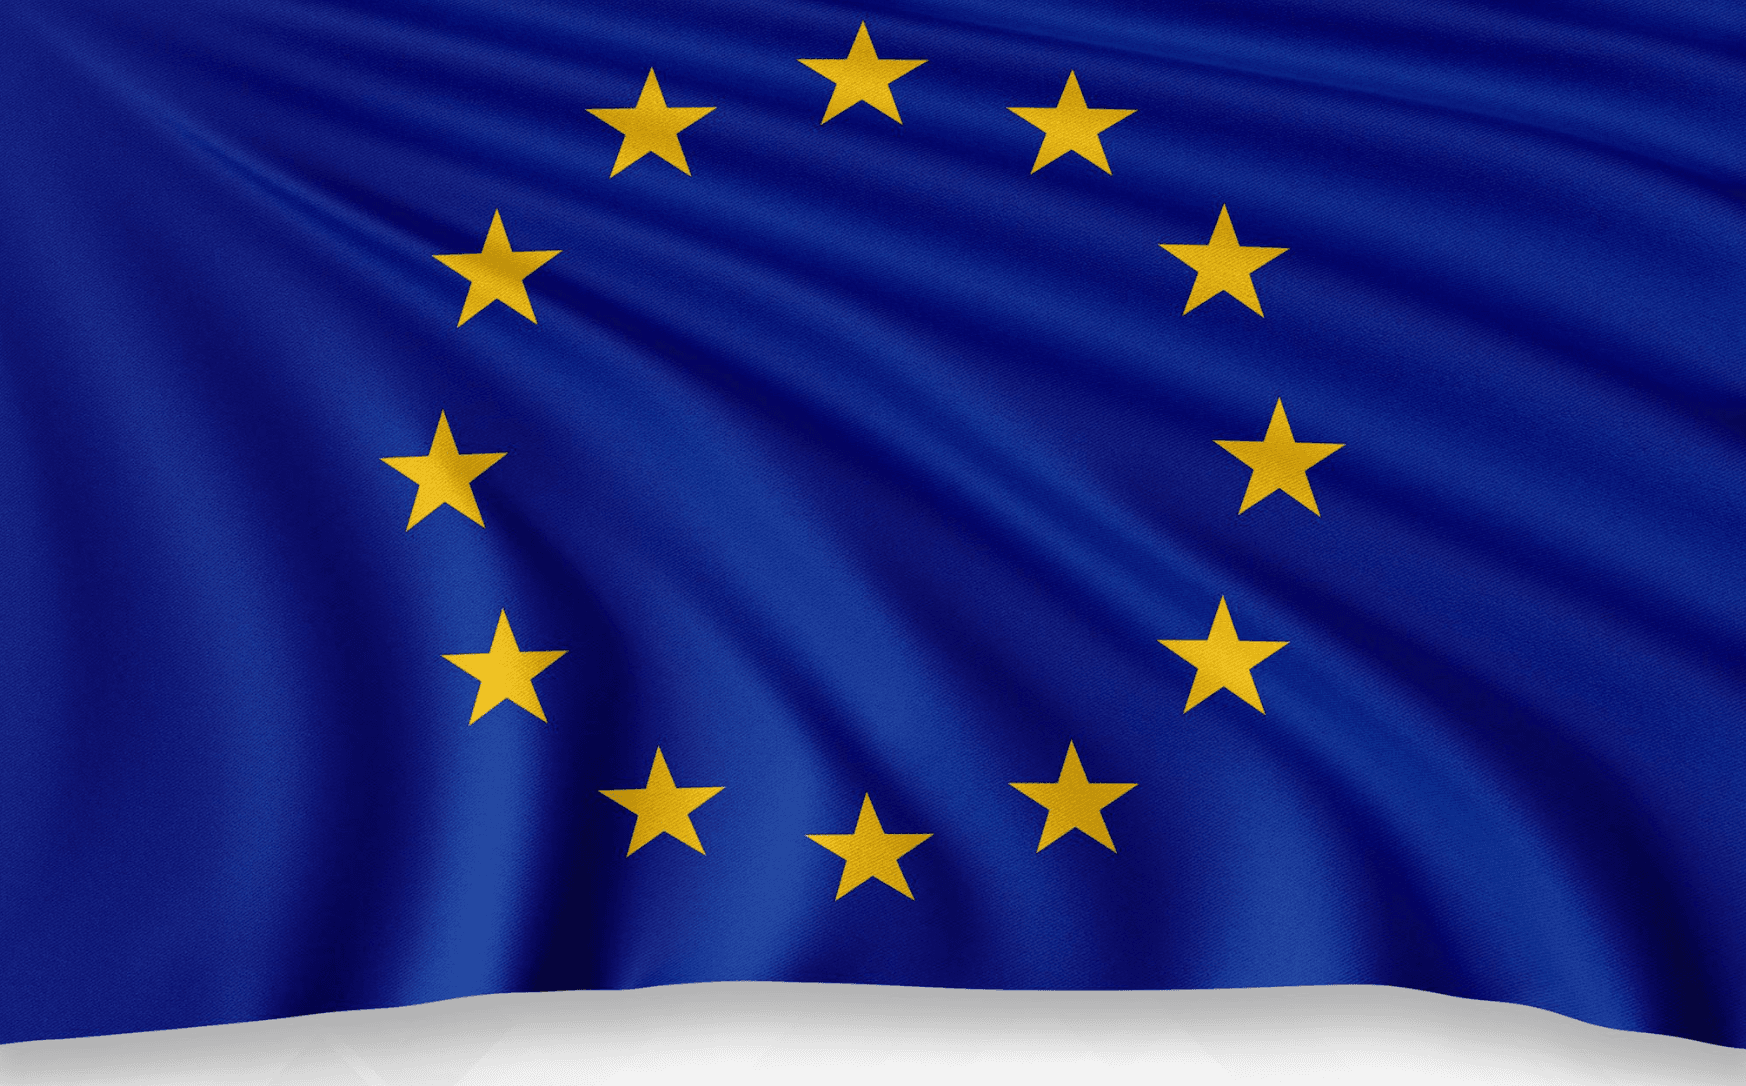 Minister Zameer sends Europe Day greetings to the leadership of the European Union